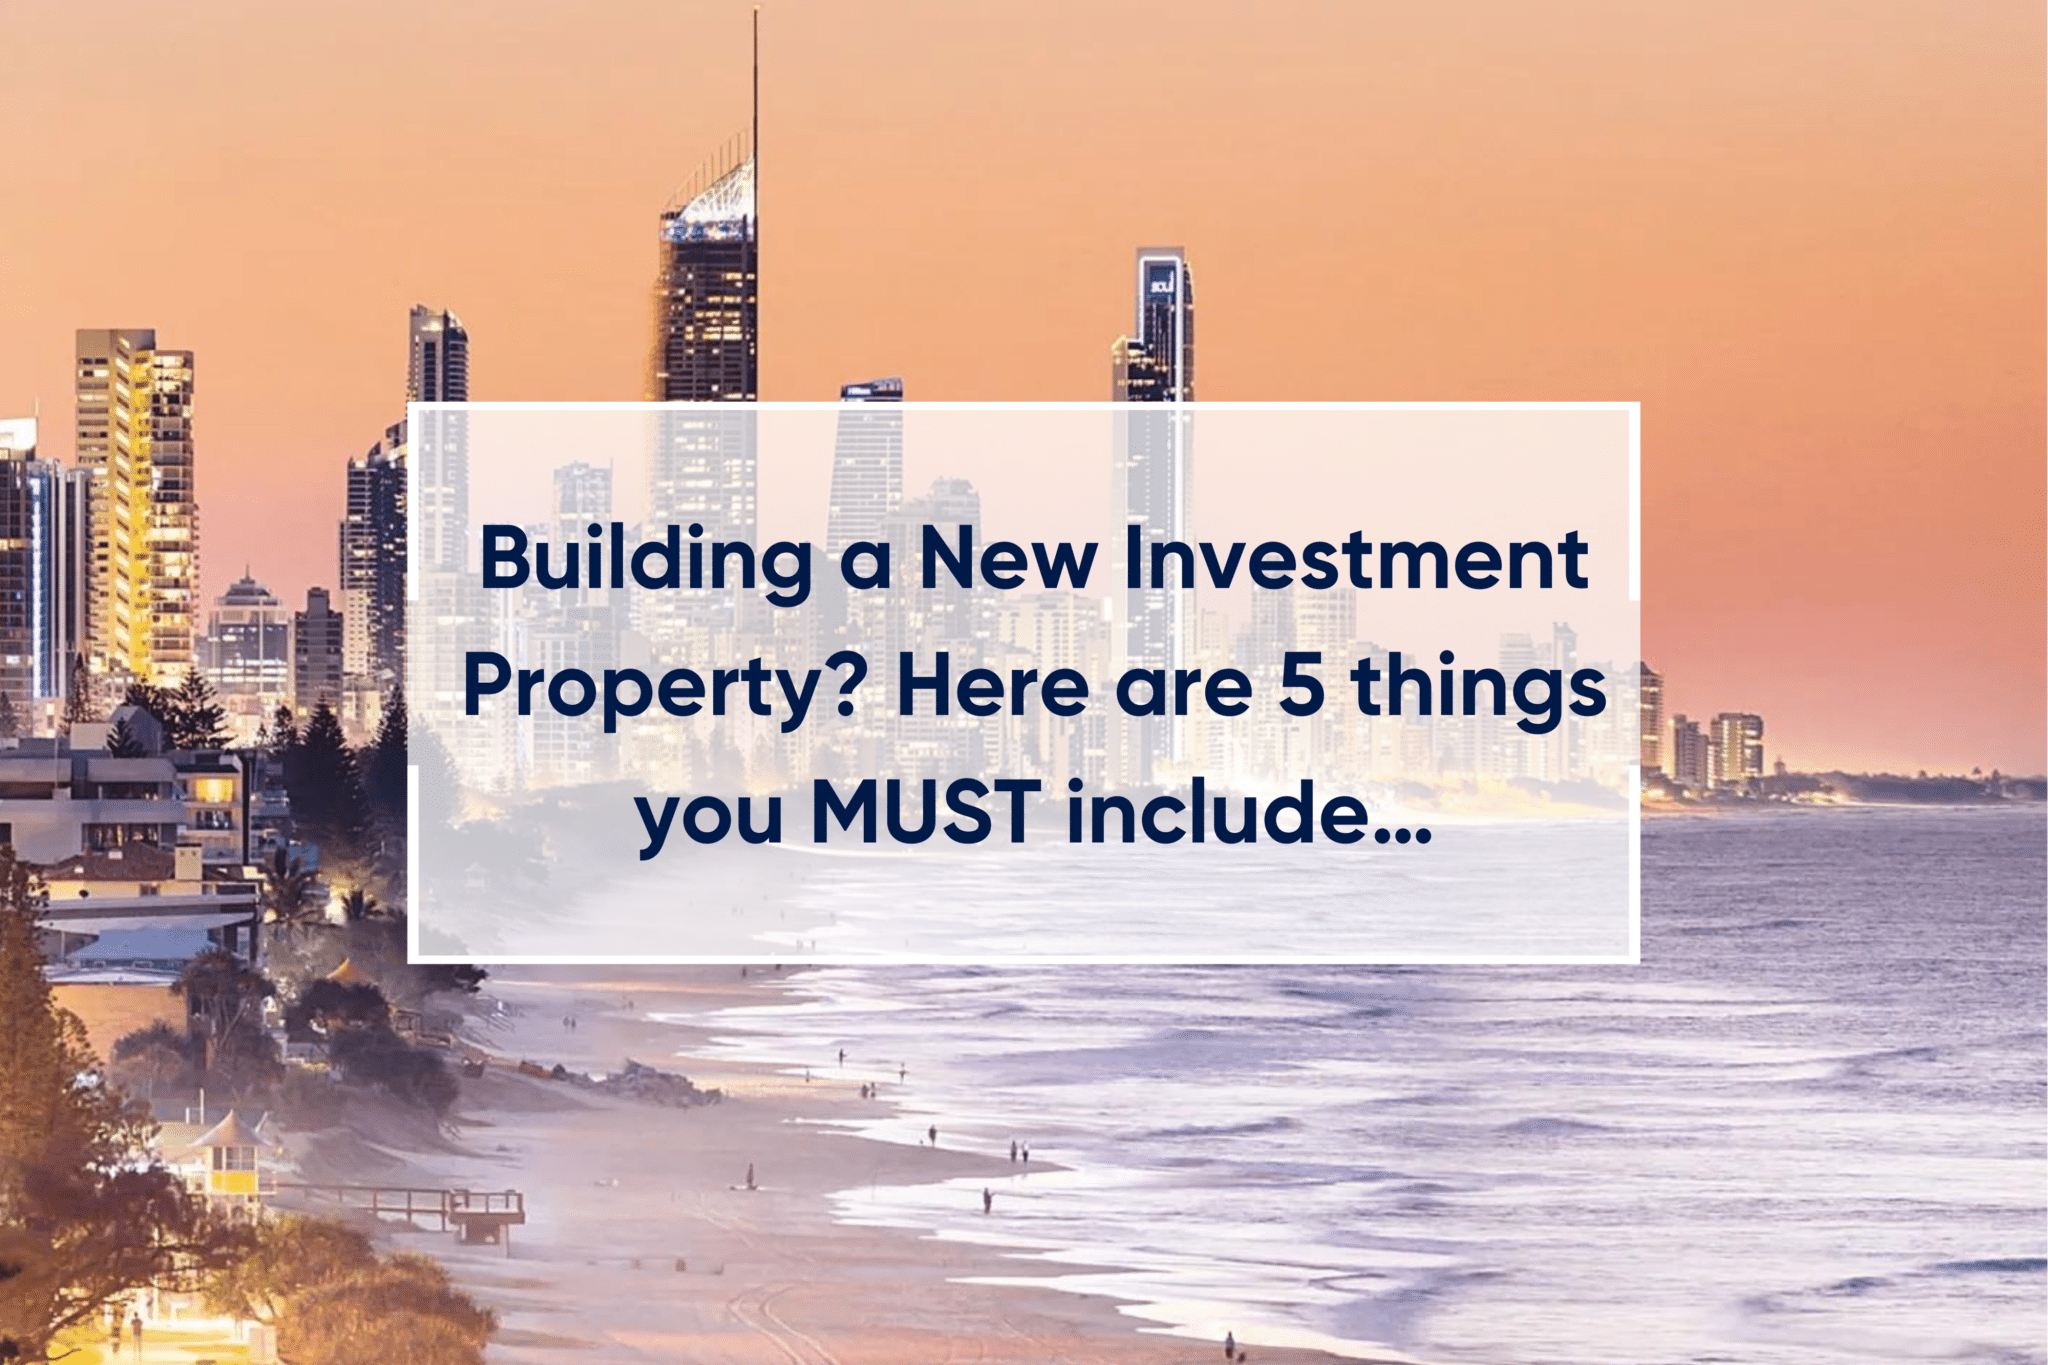 Building a new investment property? Here are 5 things you MUST include…